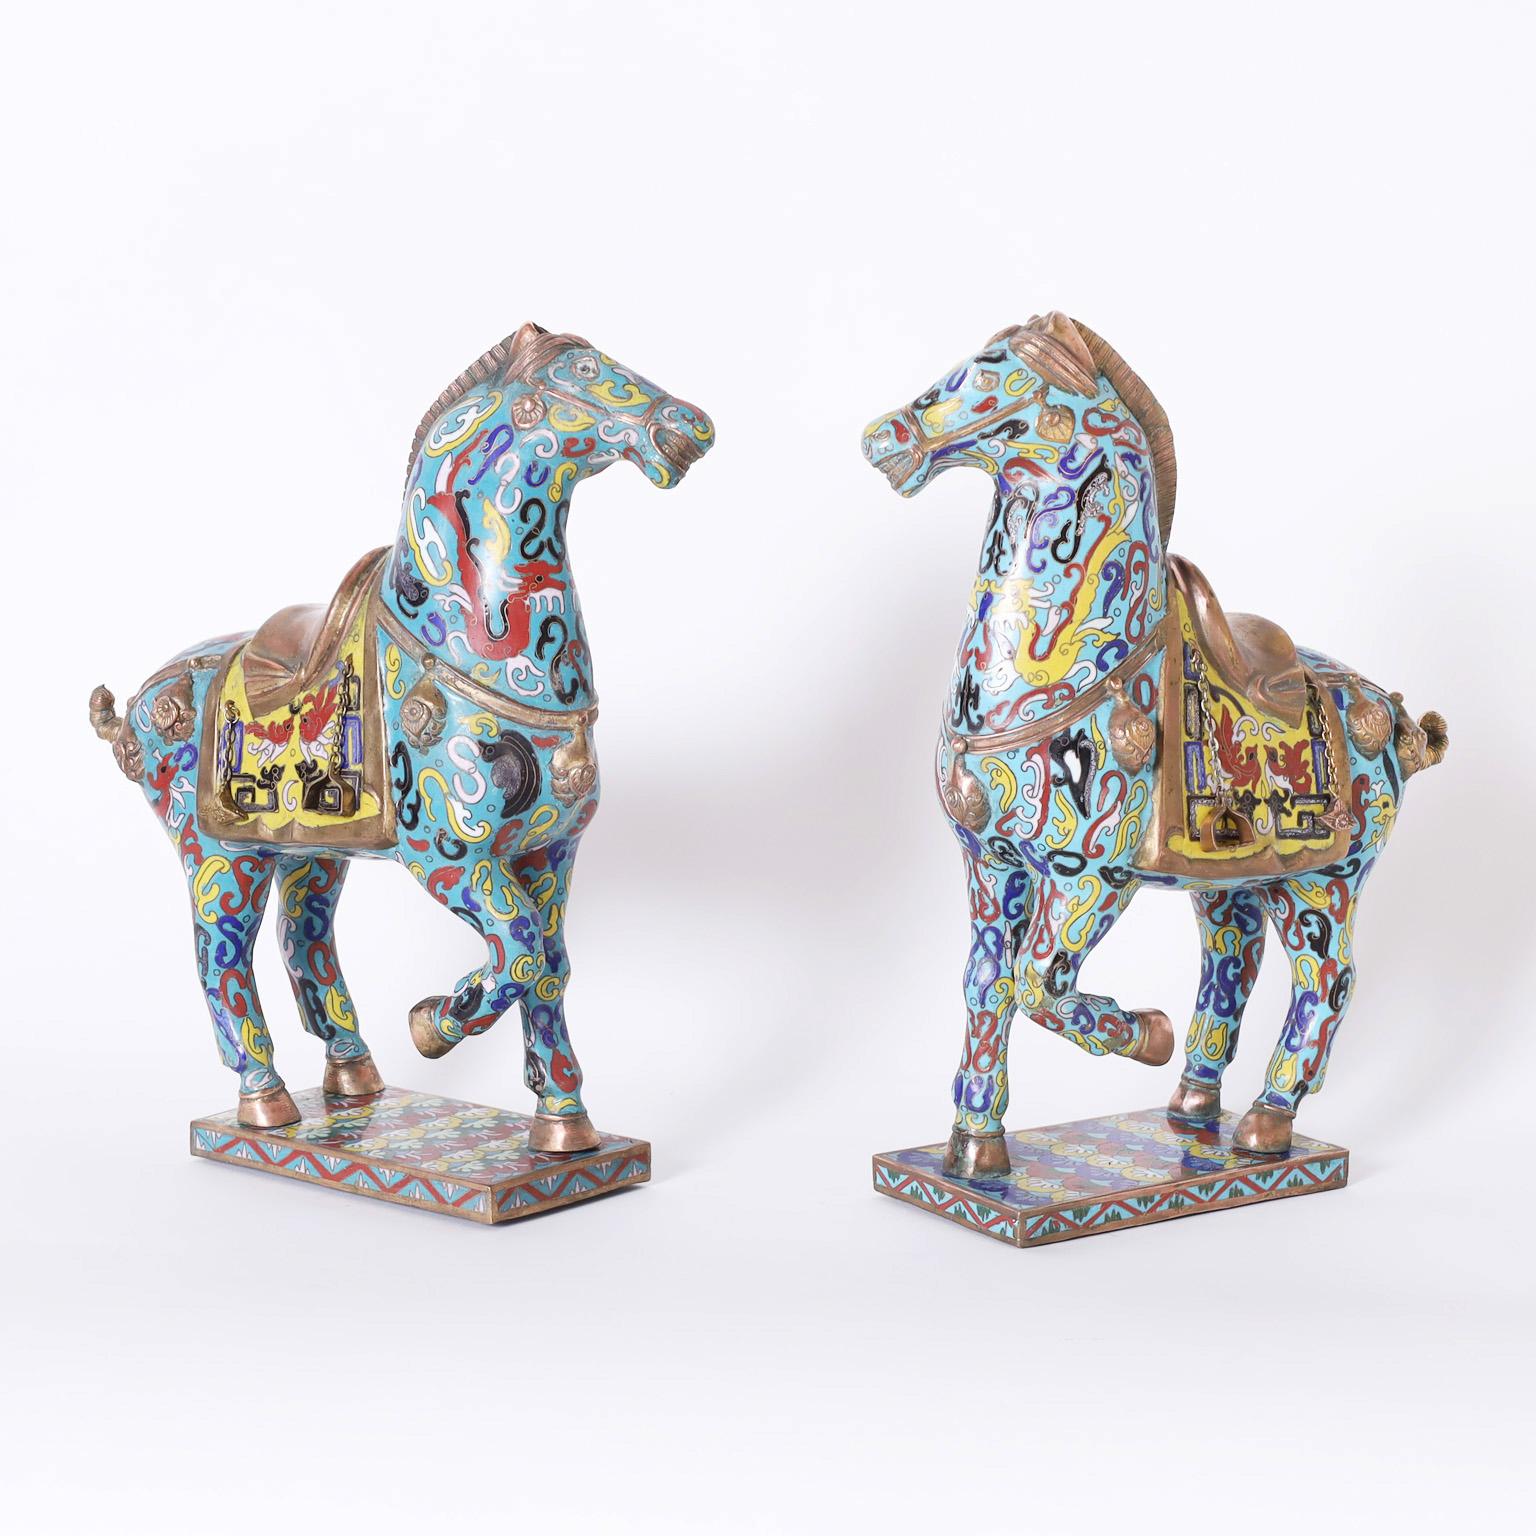 Vintage pair of Chinese cloisonné horses with a Tang dynasty form decorated with colorful symbolic references on an alluring blue background.